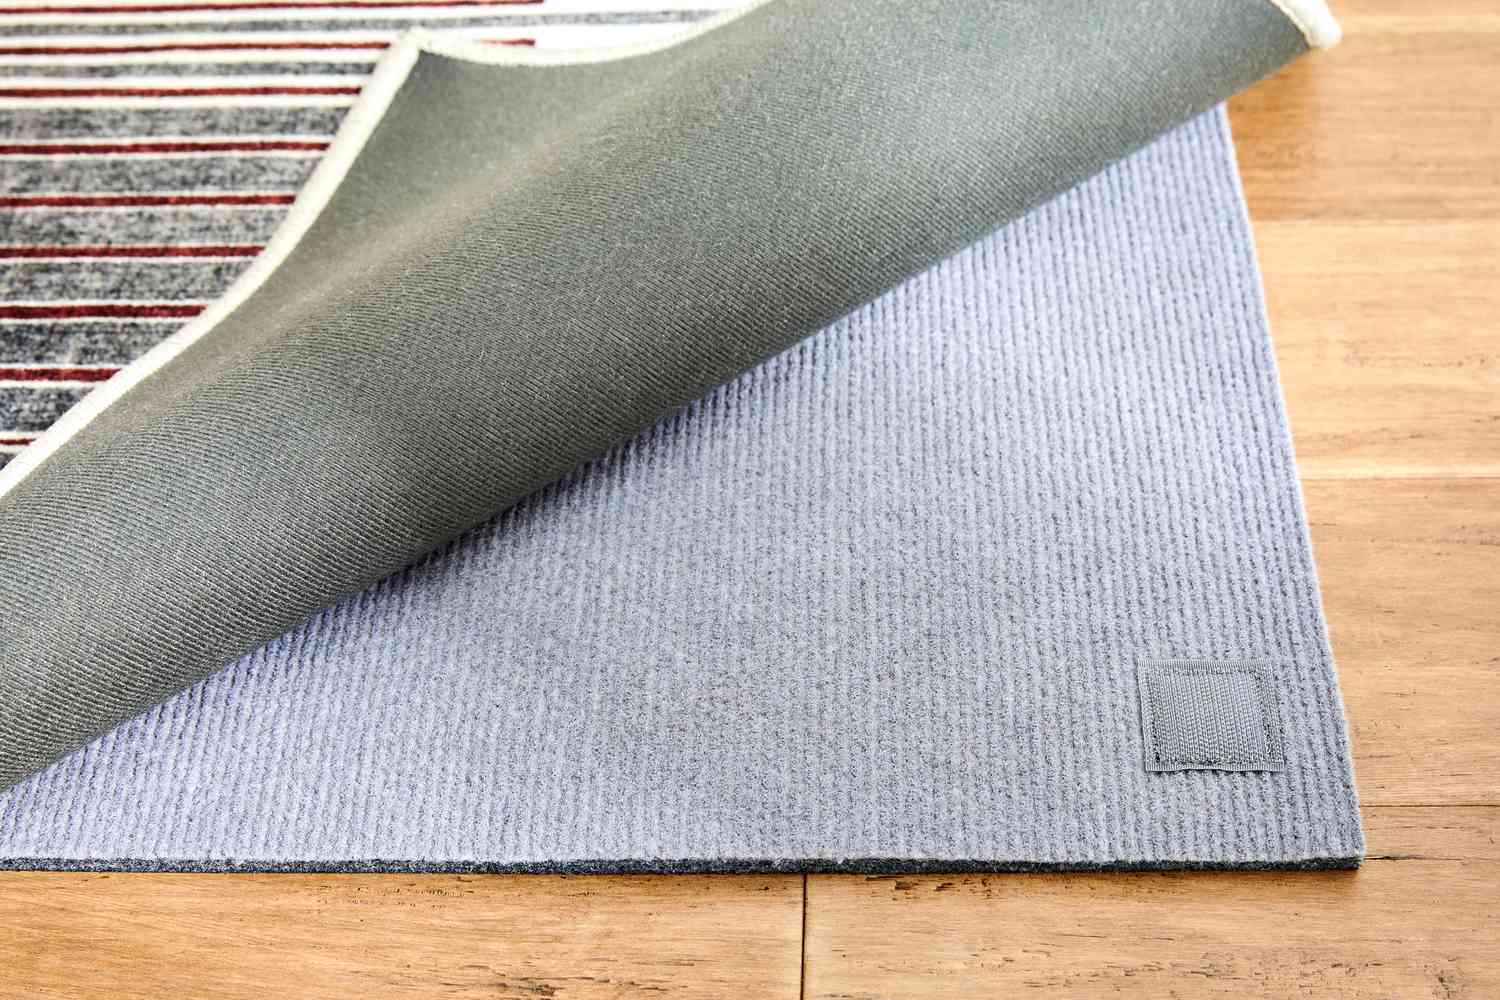 One side of the Ruggable Gradasi Premium Rug lifted up